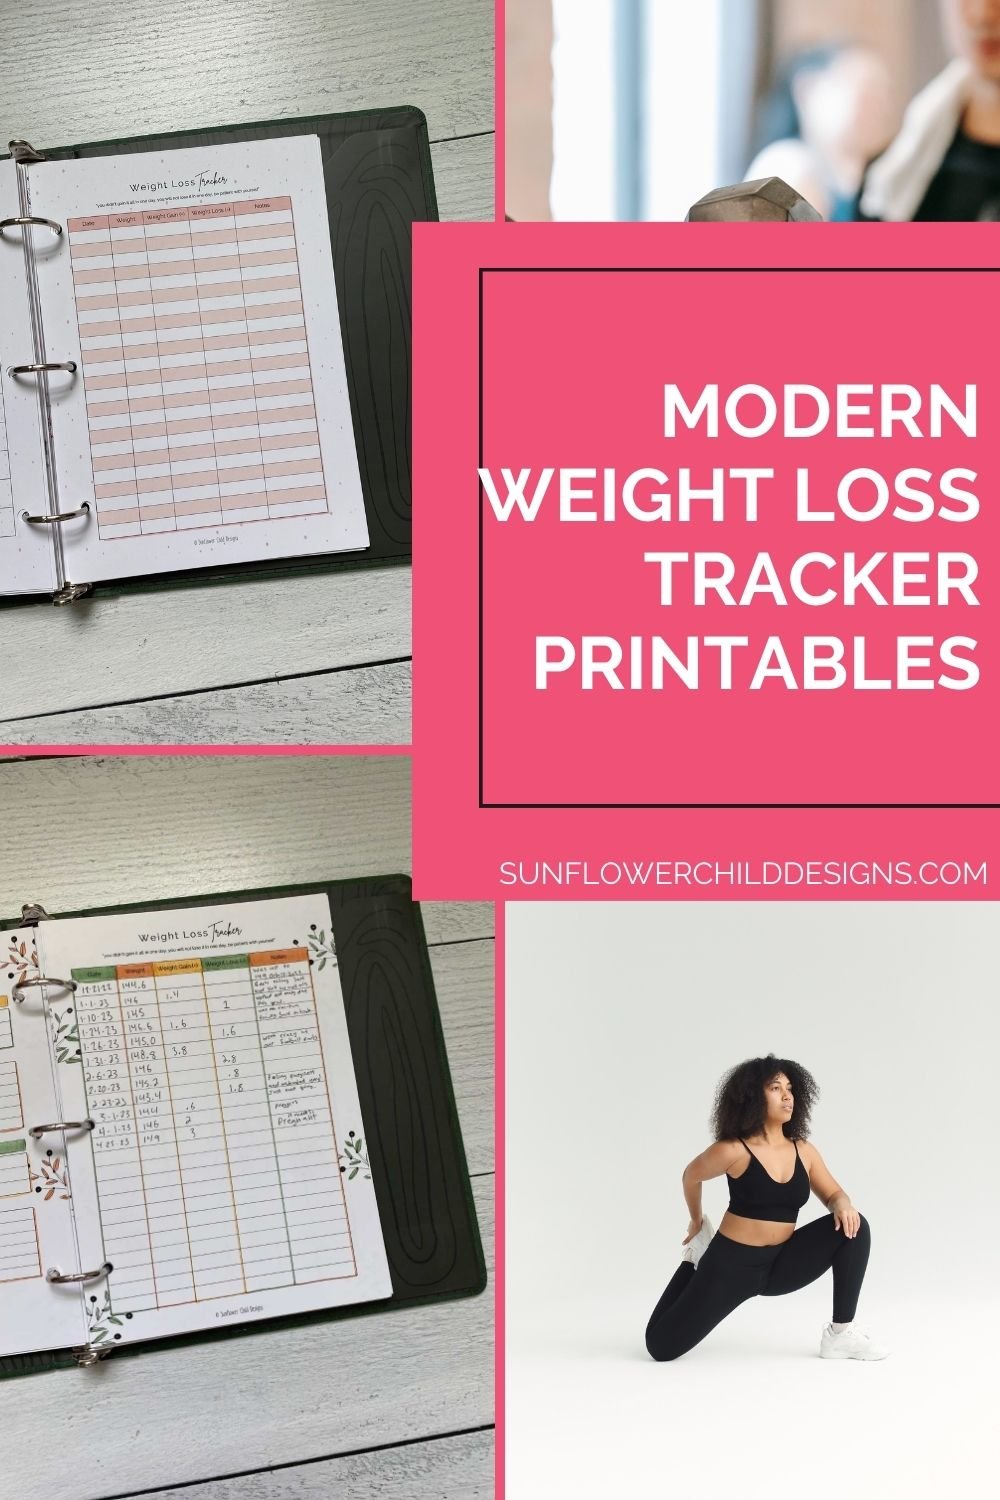 "Revolutionize Your Fitness Journey with this Modern Weight Loss Tracker Printable!"